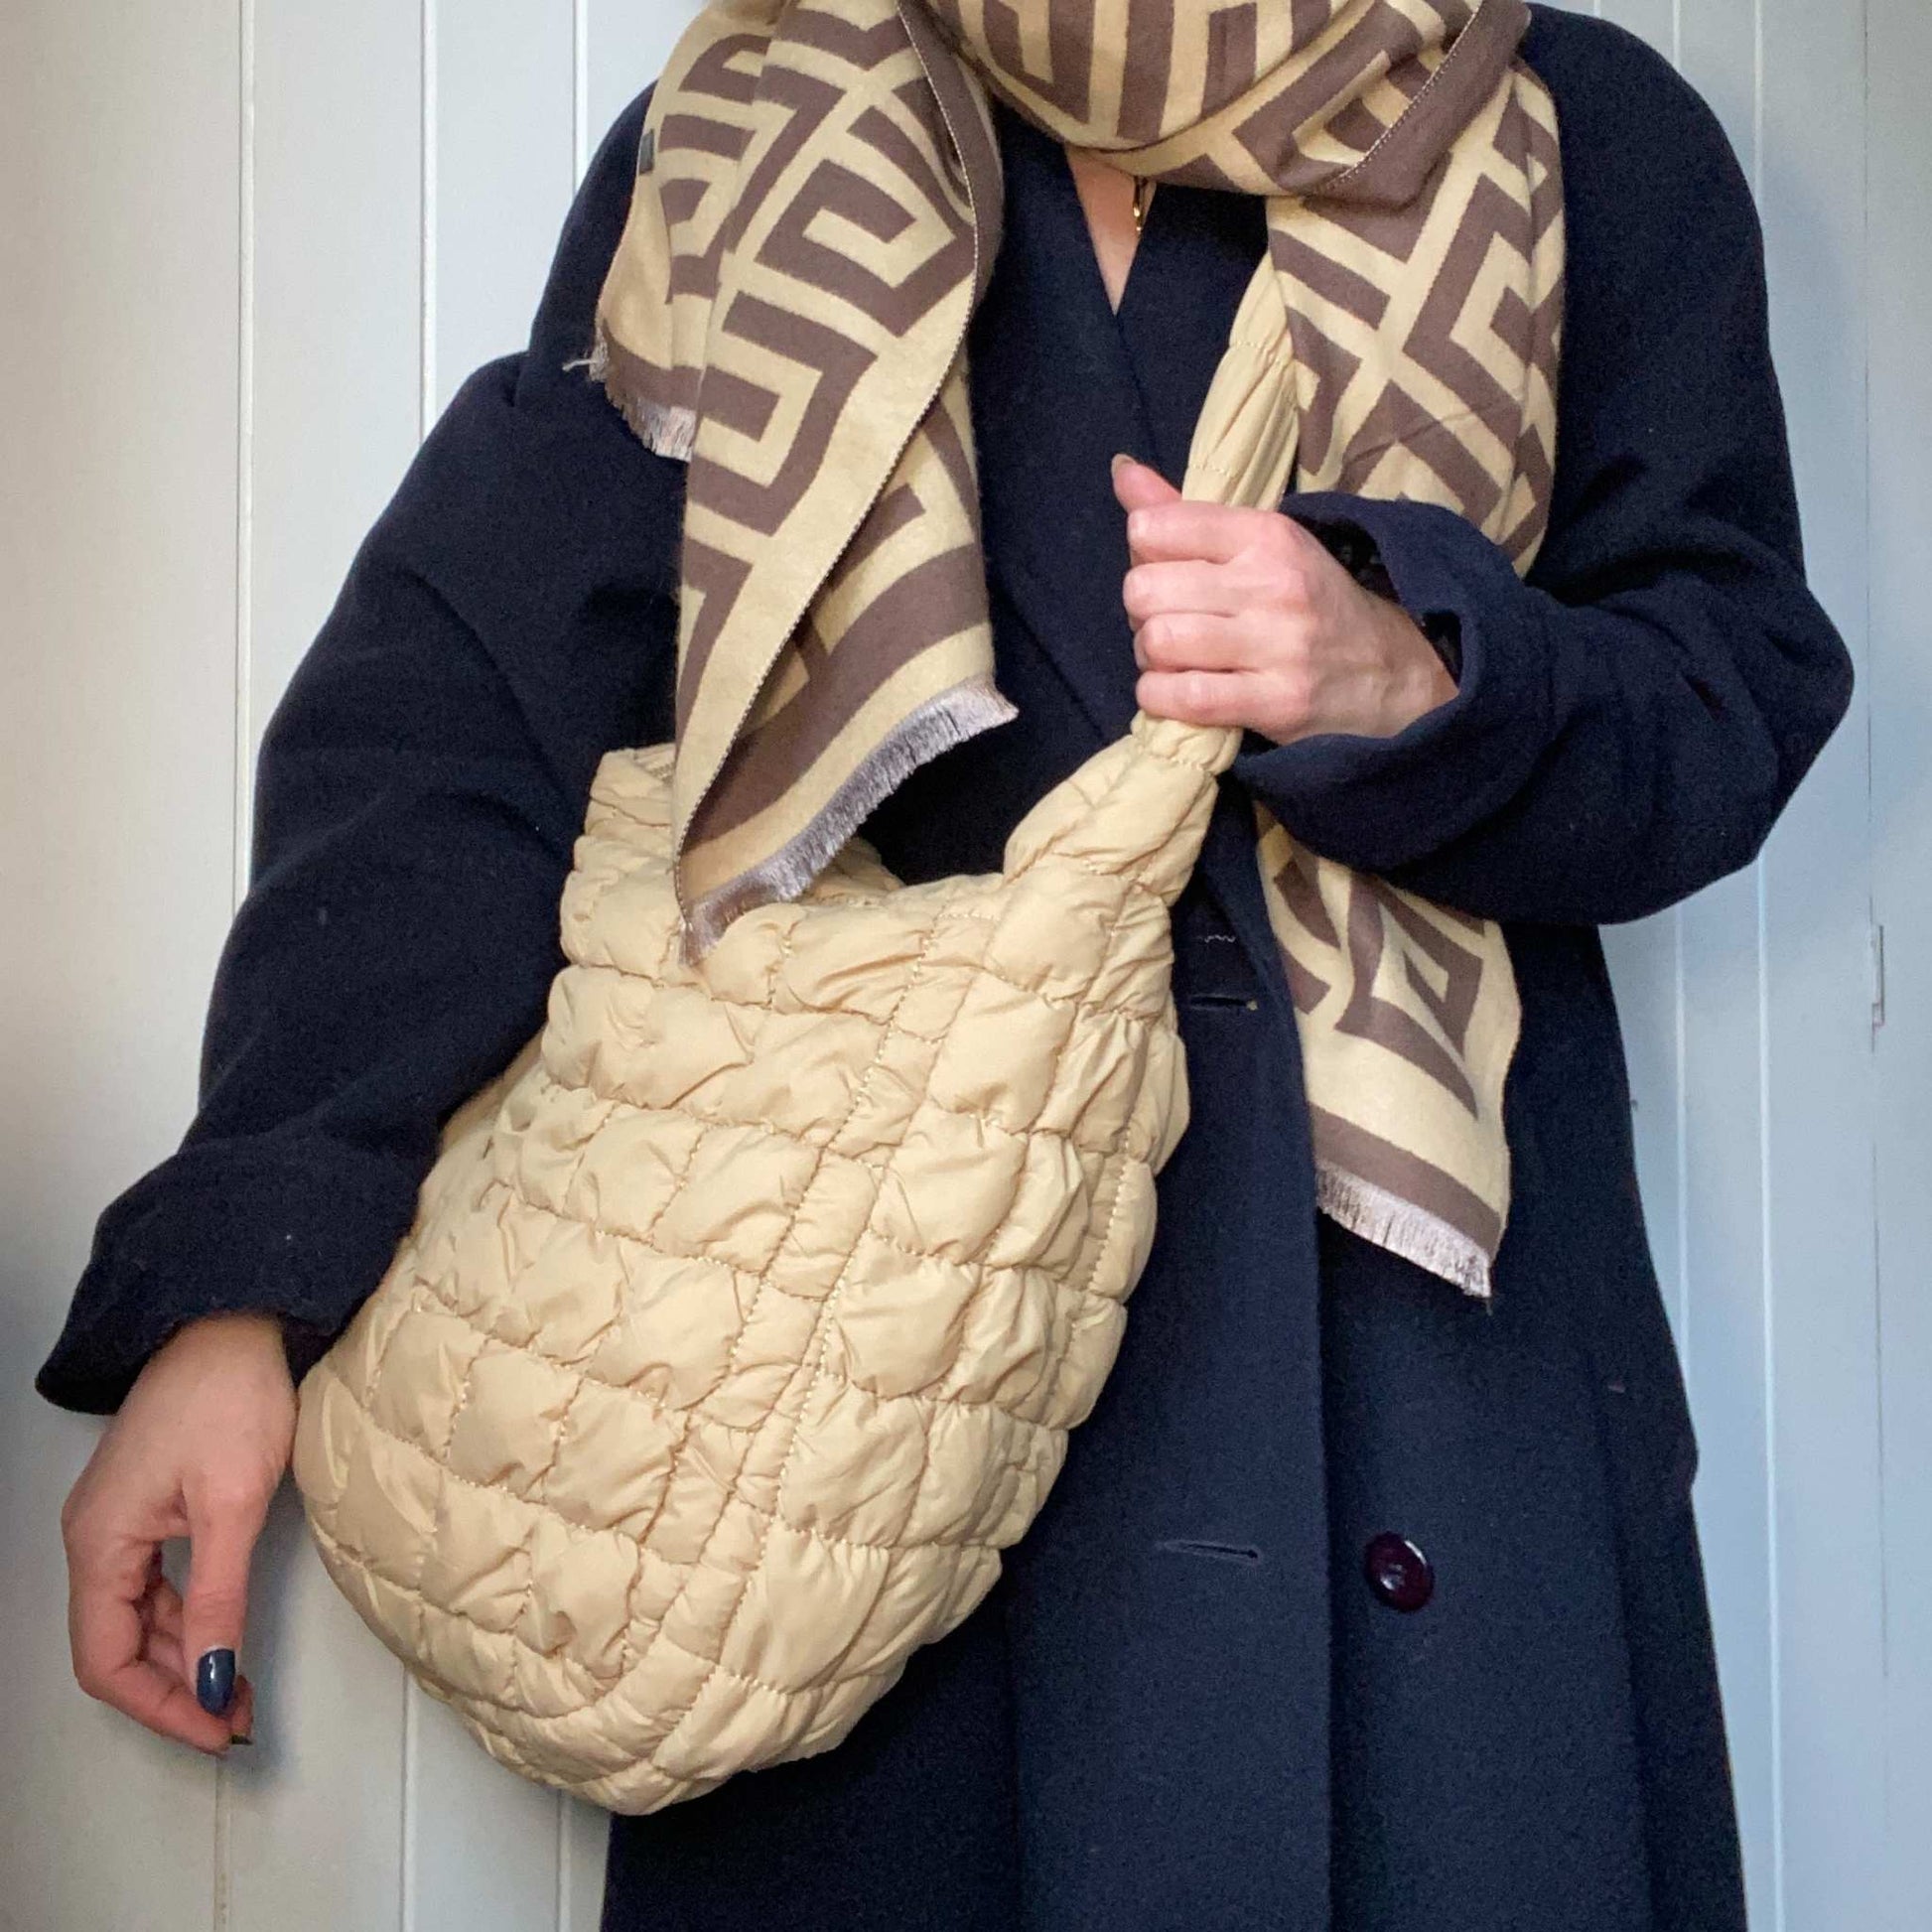 Stylish quilted bag, a great addition to any outfit